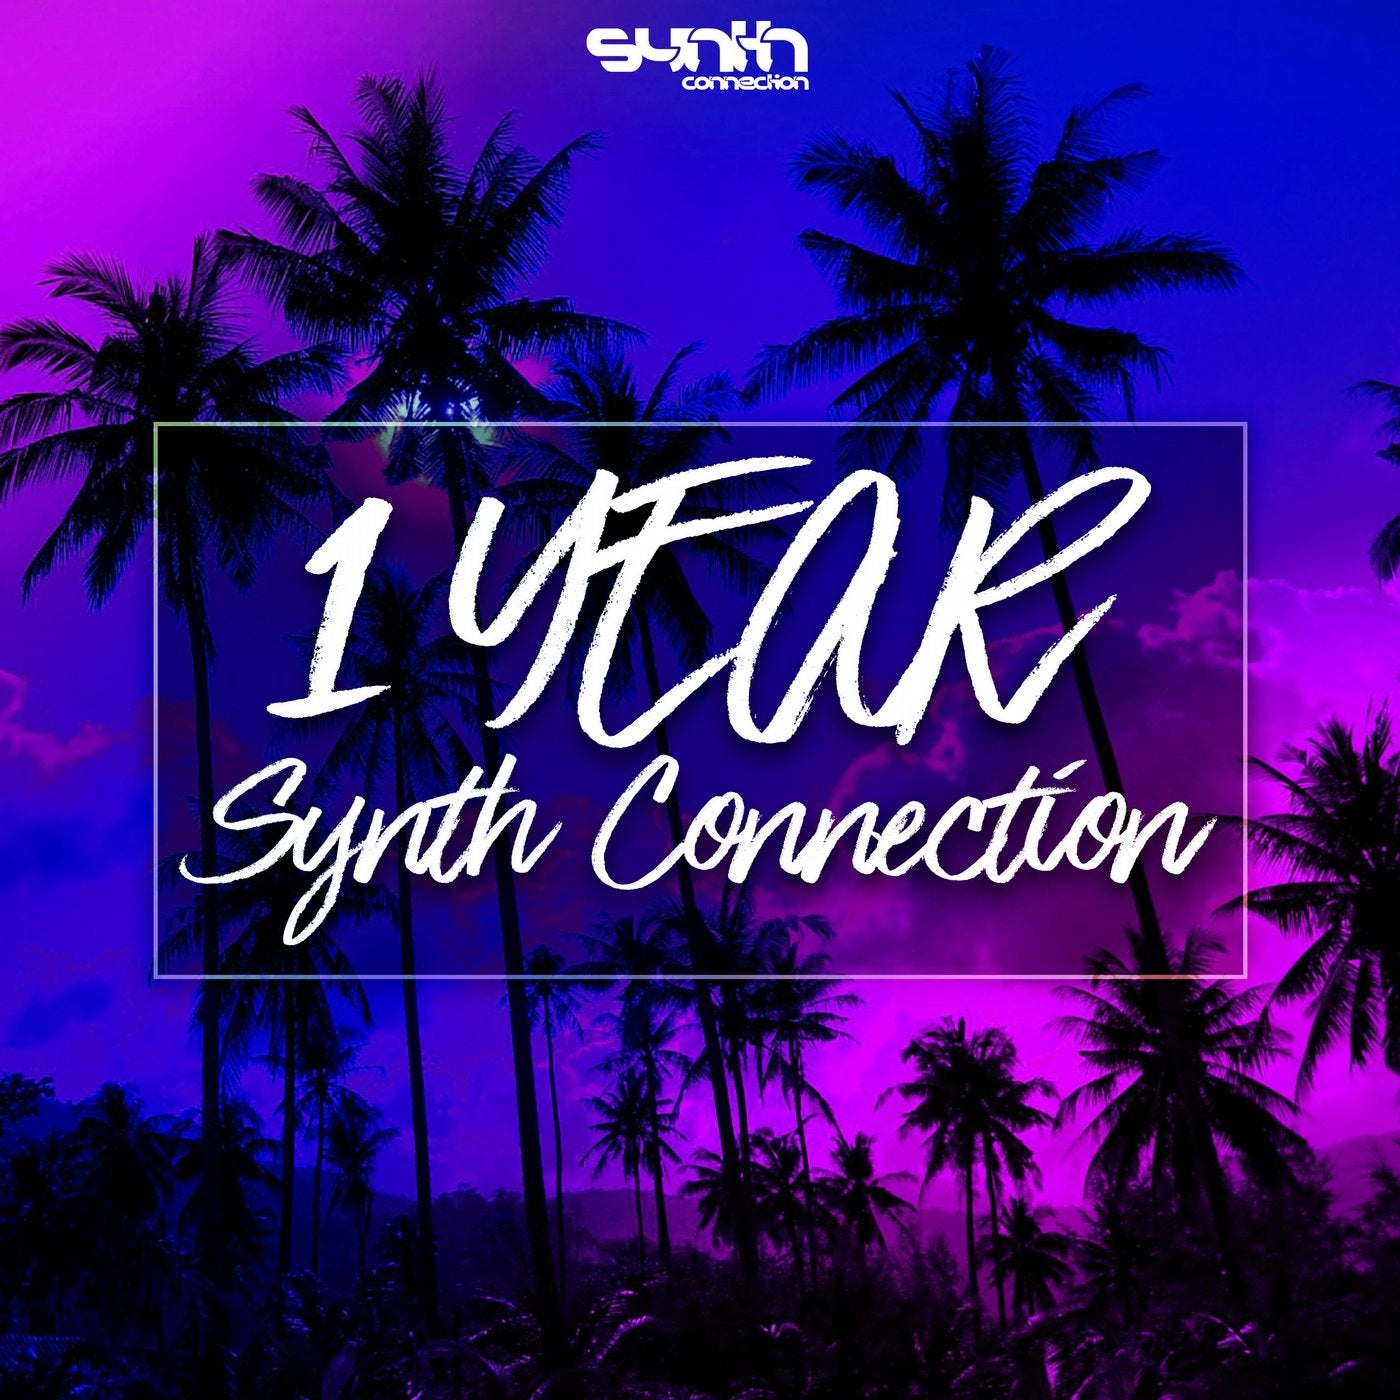 1 Year Synth Connection